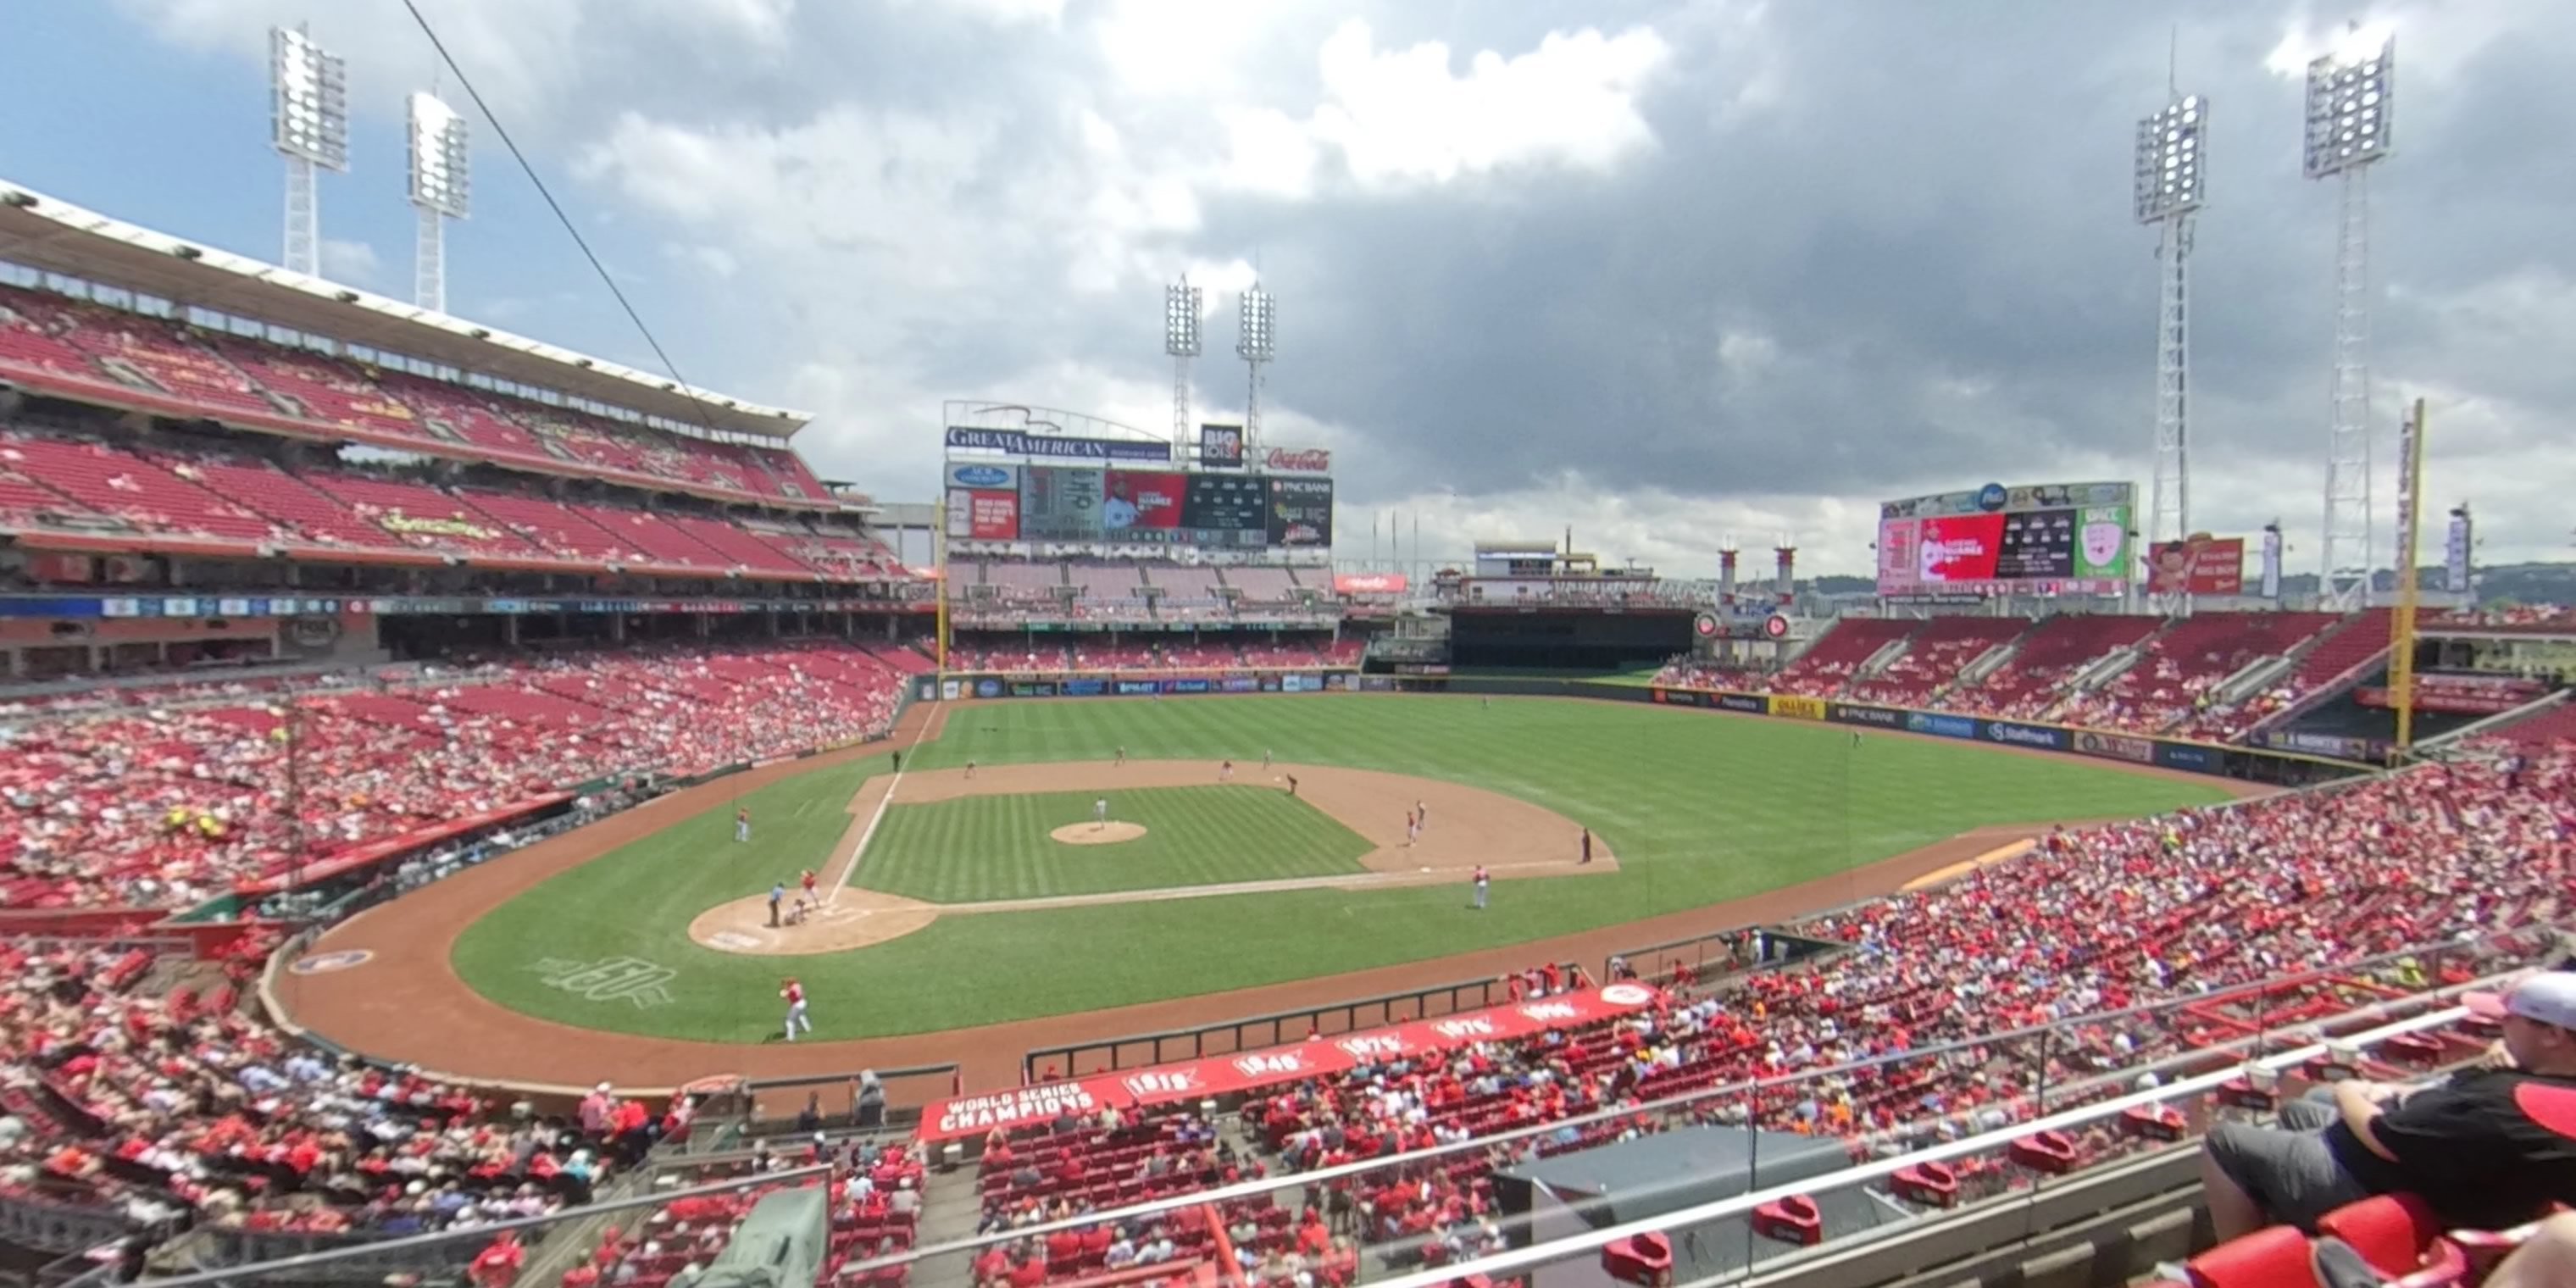 Section 228 at Great American Ball Park 